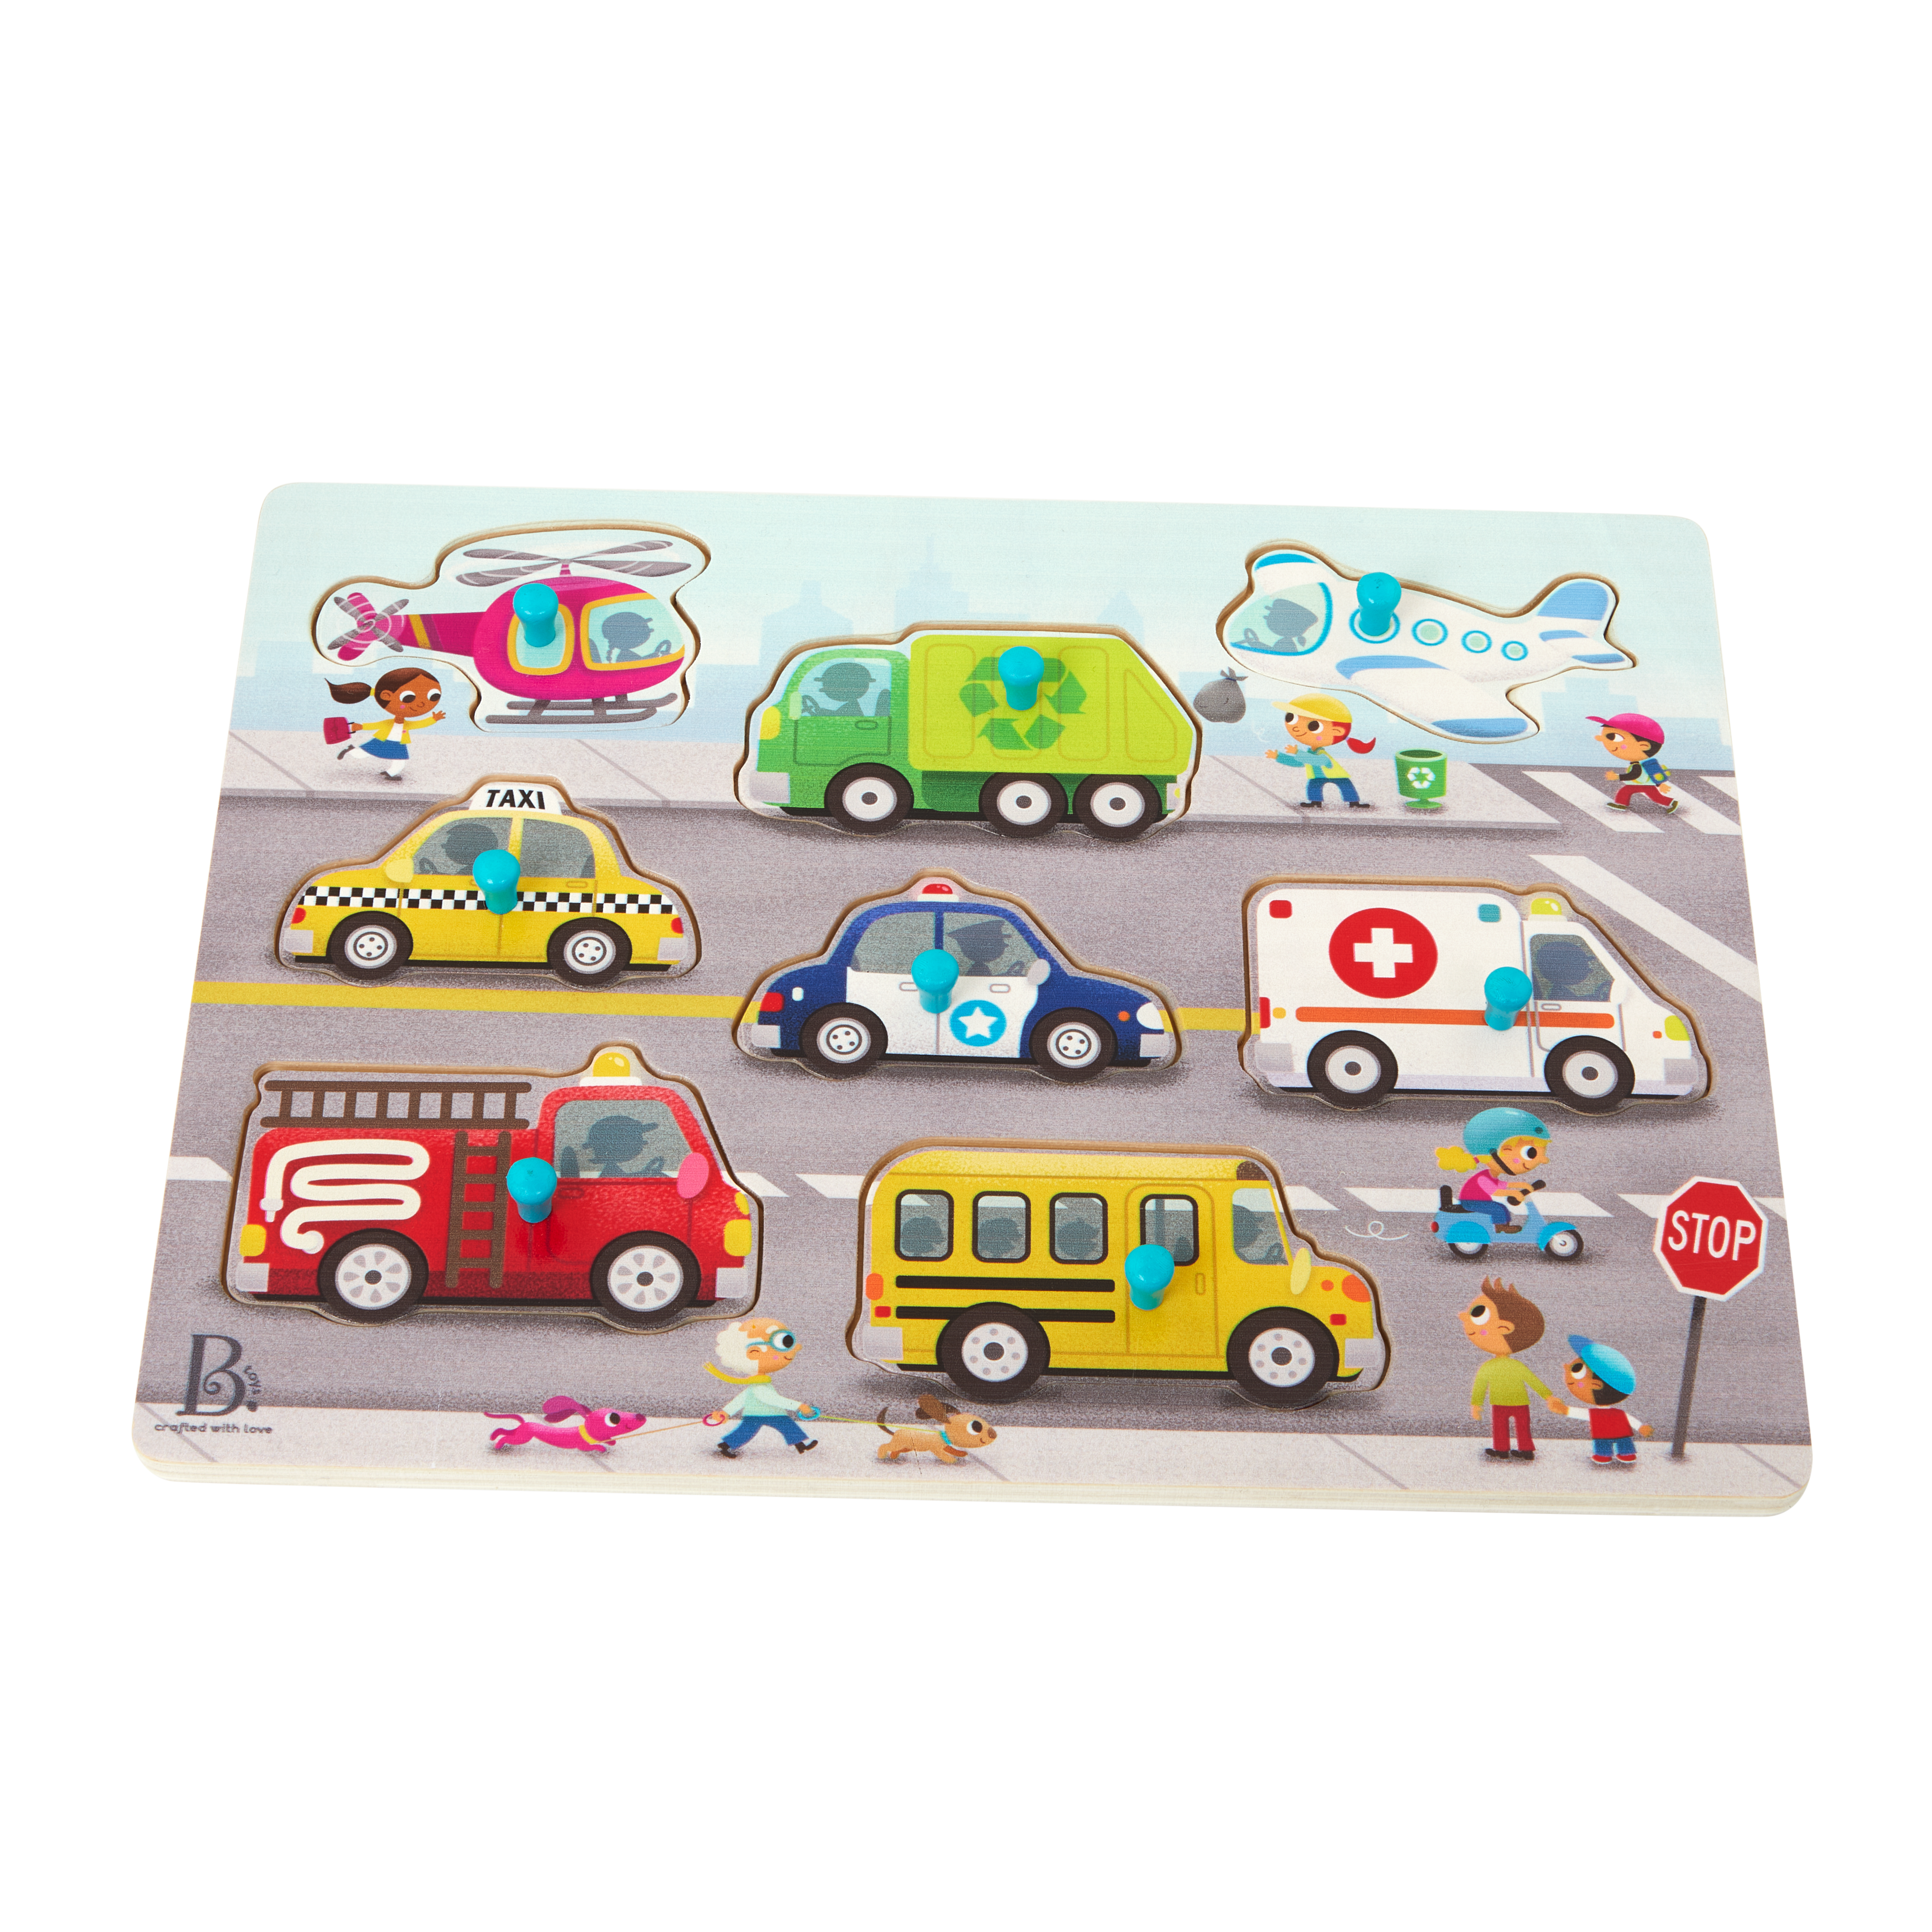 Peg puzzle with vehicles.